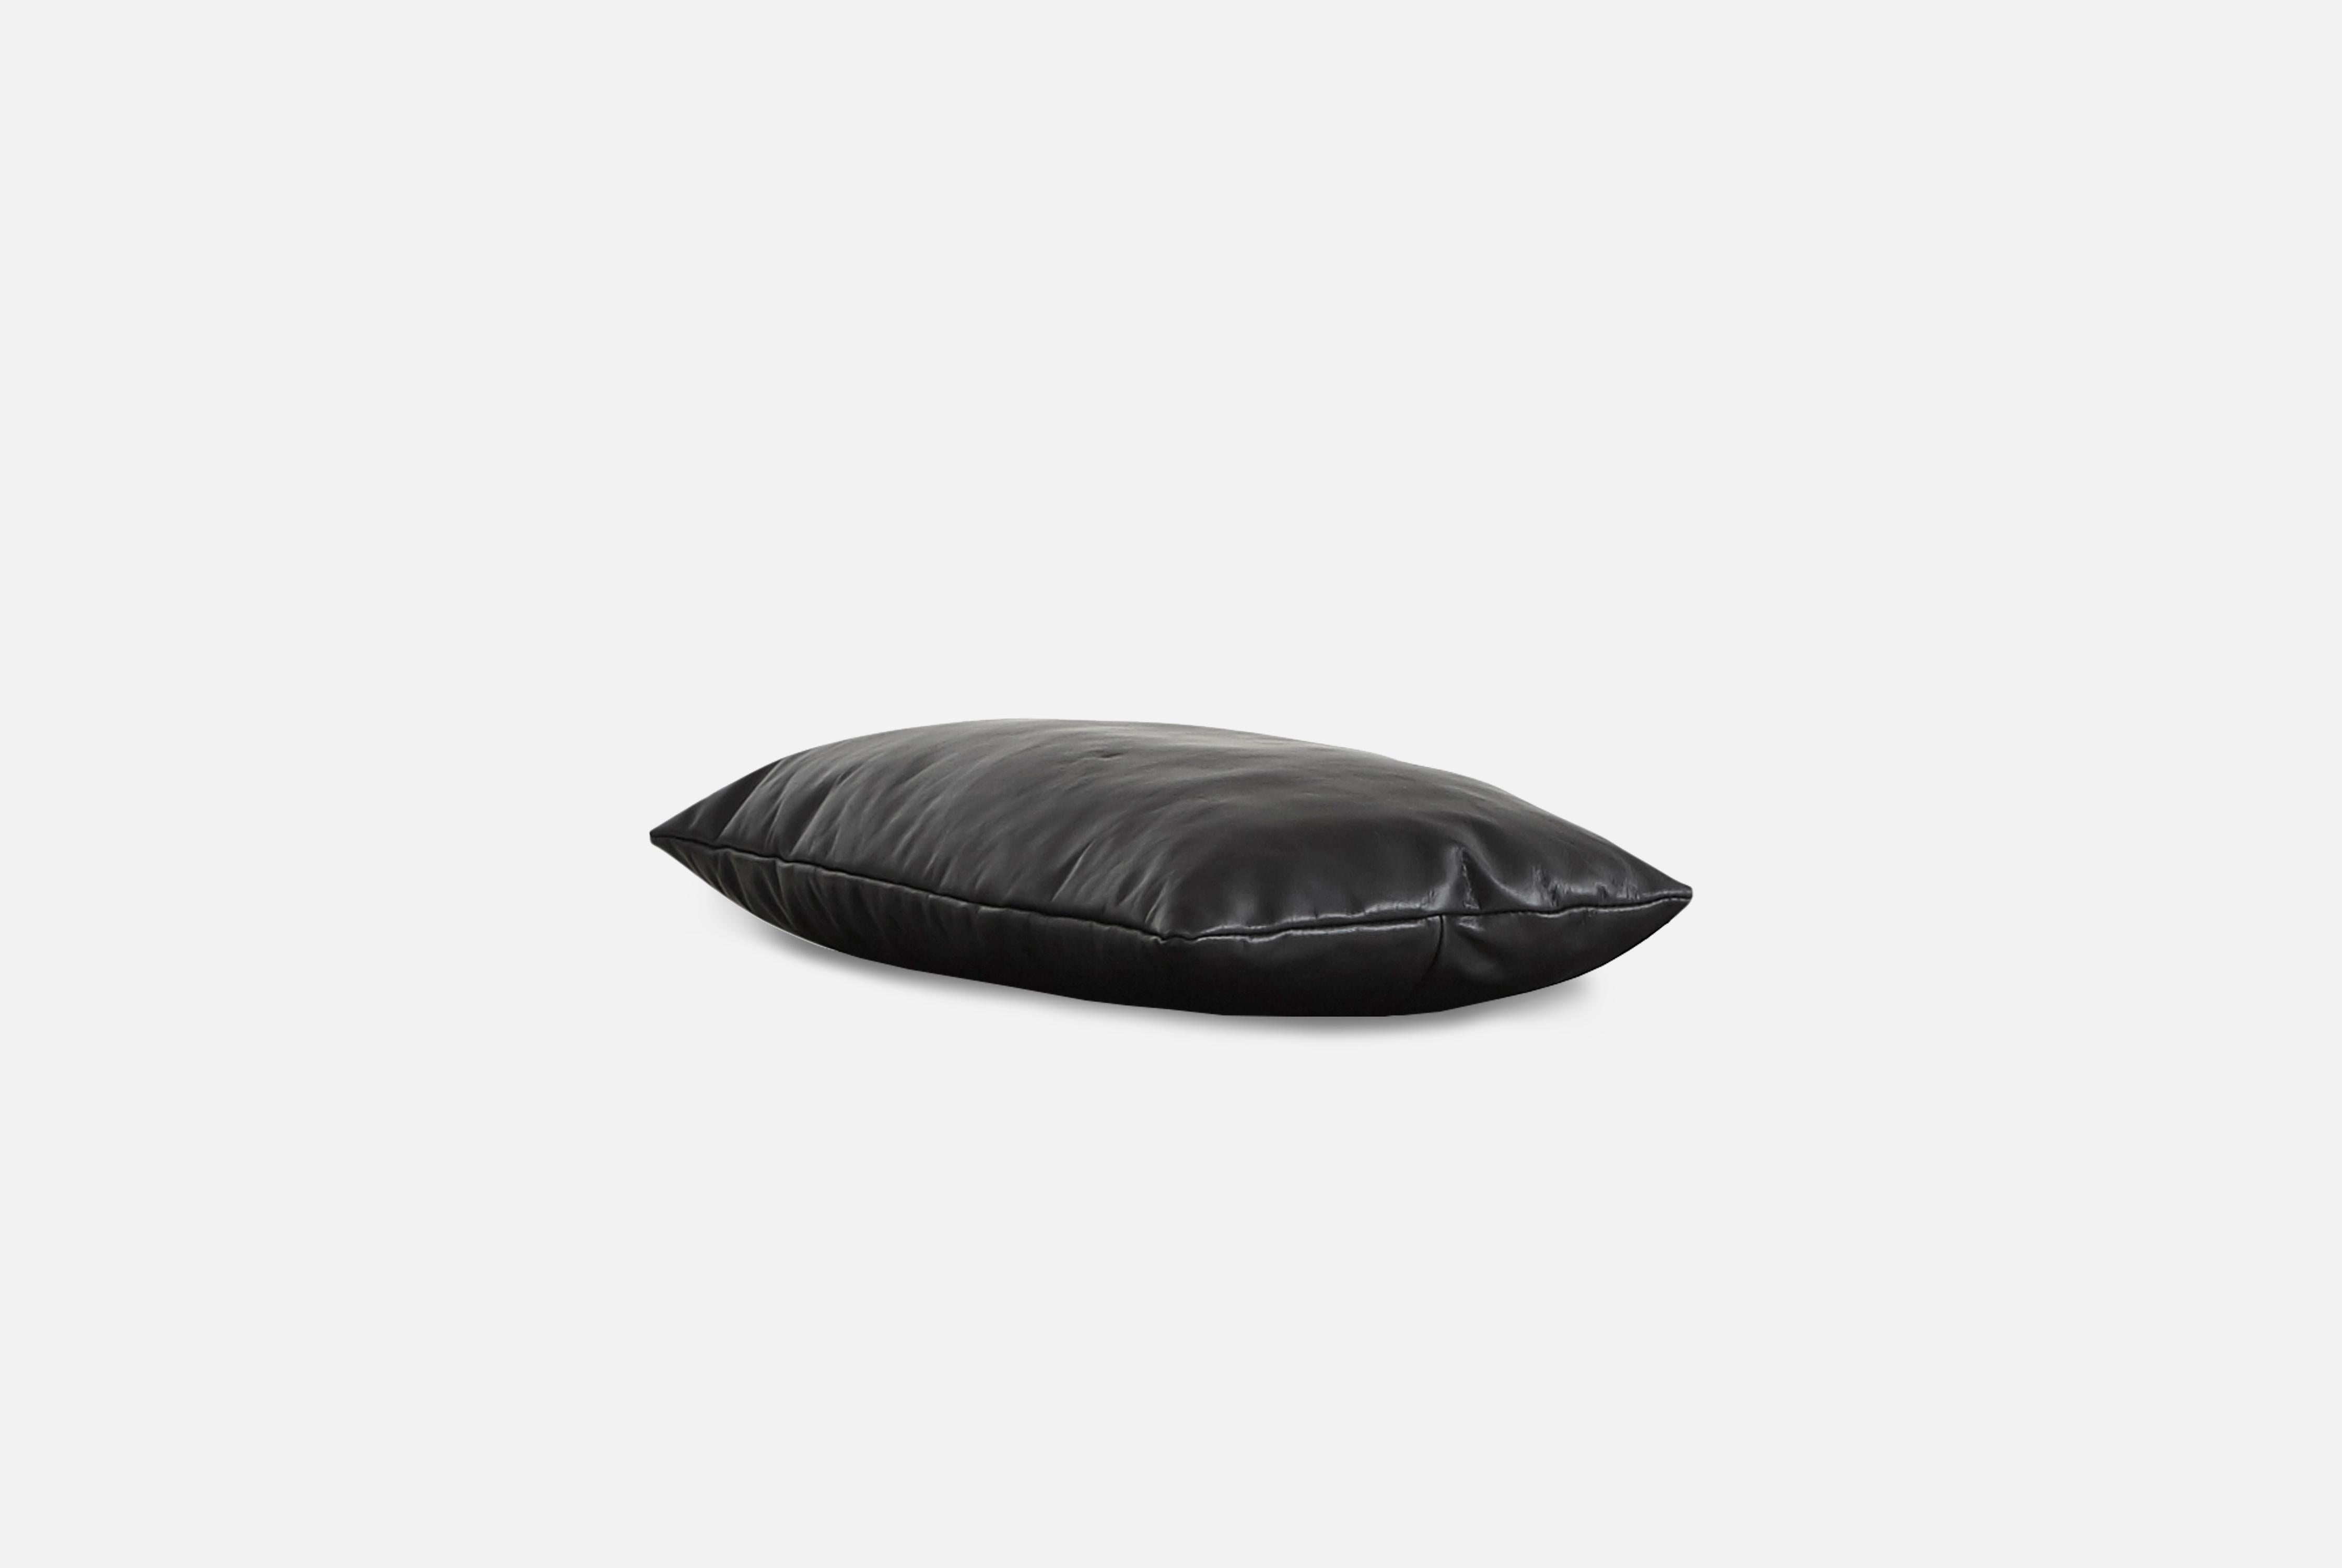 Level Pillow by Msds Studio
Materials: Camo Leather, Fabric
Dimensions: D 23.5 x W 67 x H 8.5 cm

The founders, Mia and Torben Koed, decided to put their 30 years of experience into a new project. It was time for a change and a new challenge. The